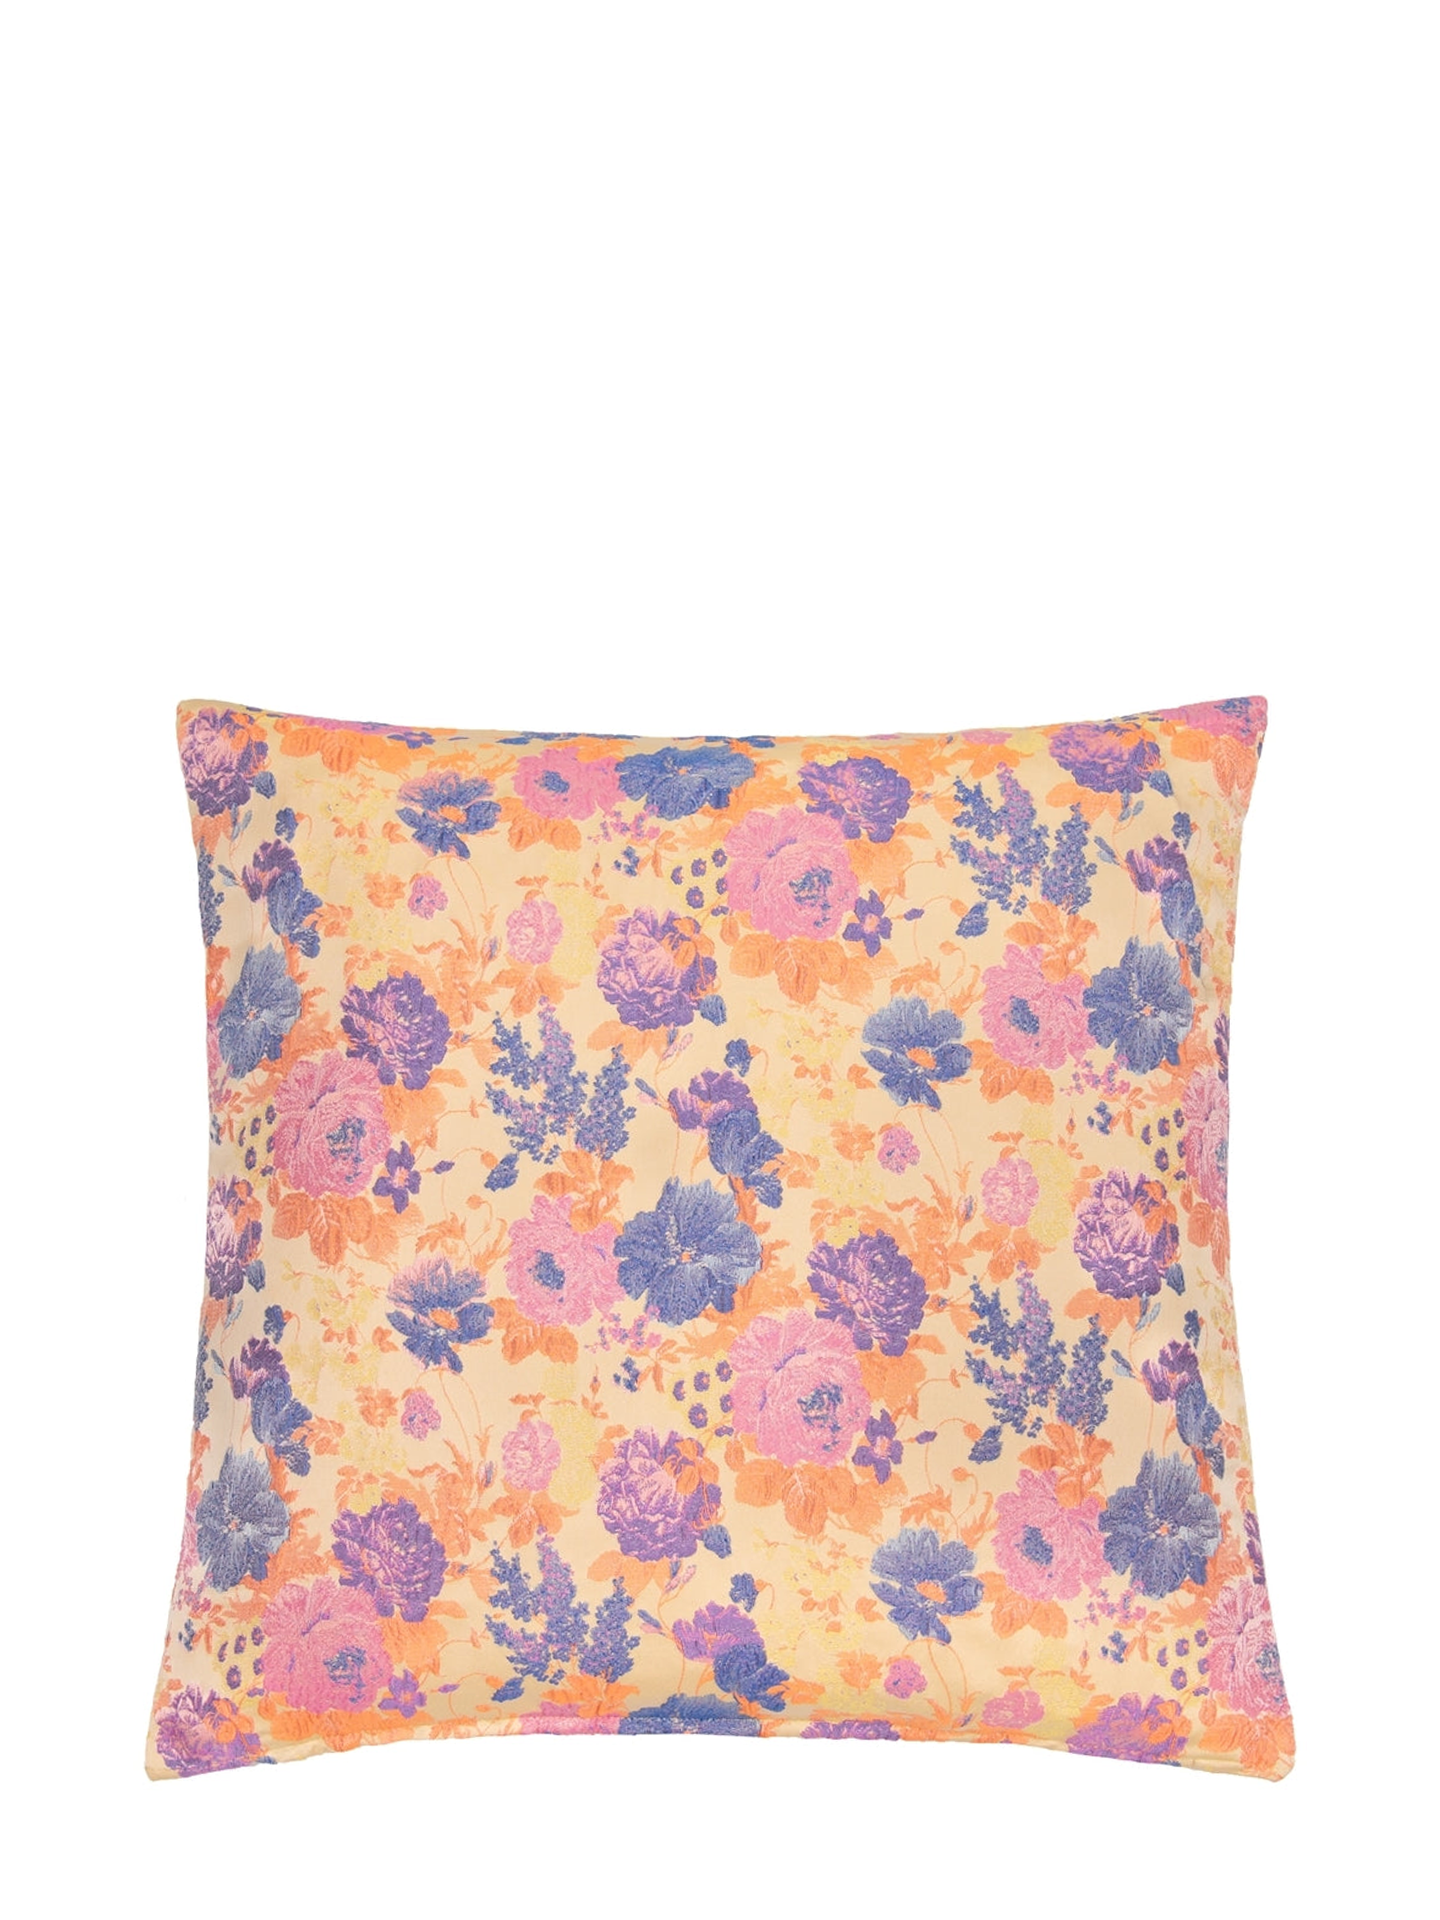 Pink, purple, orange and champagne floral cushion